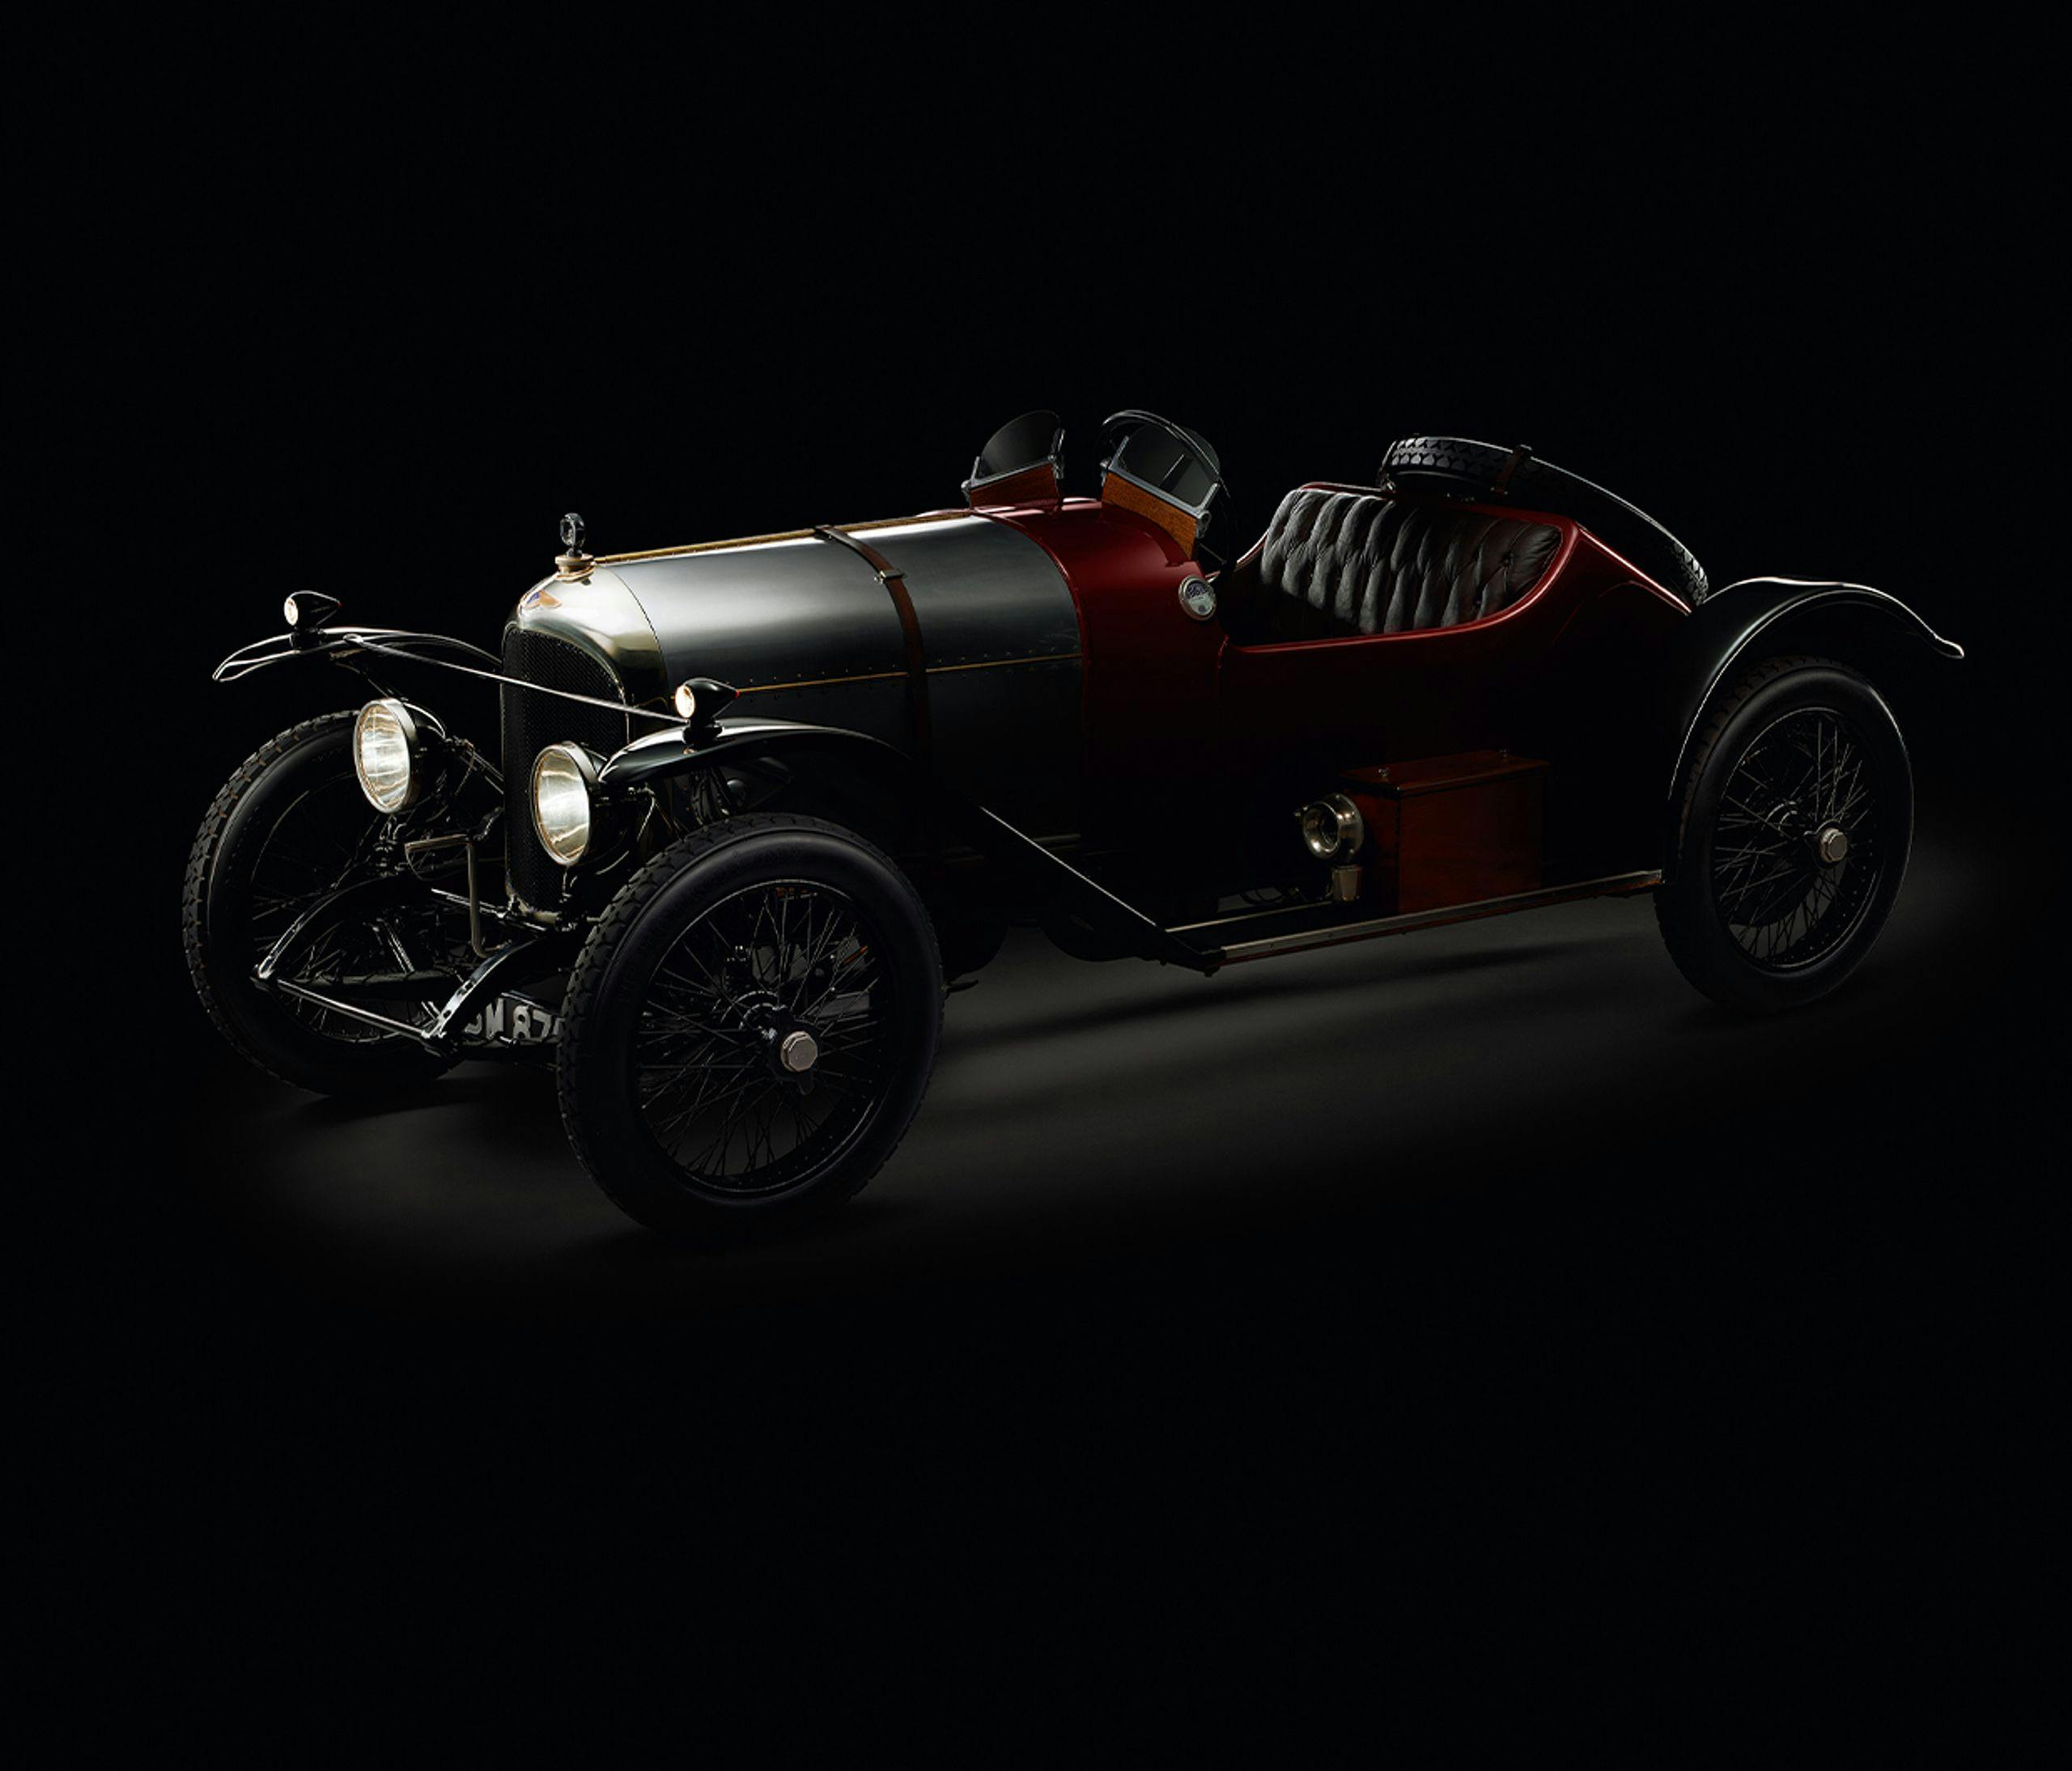 Discover the Bentley brand story